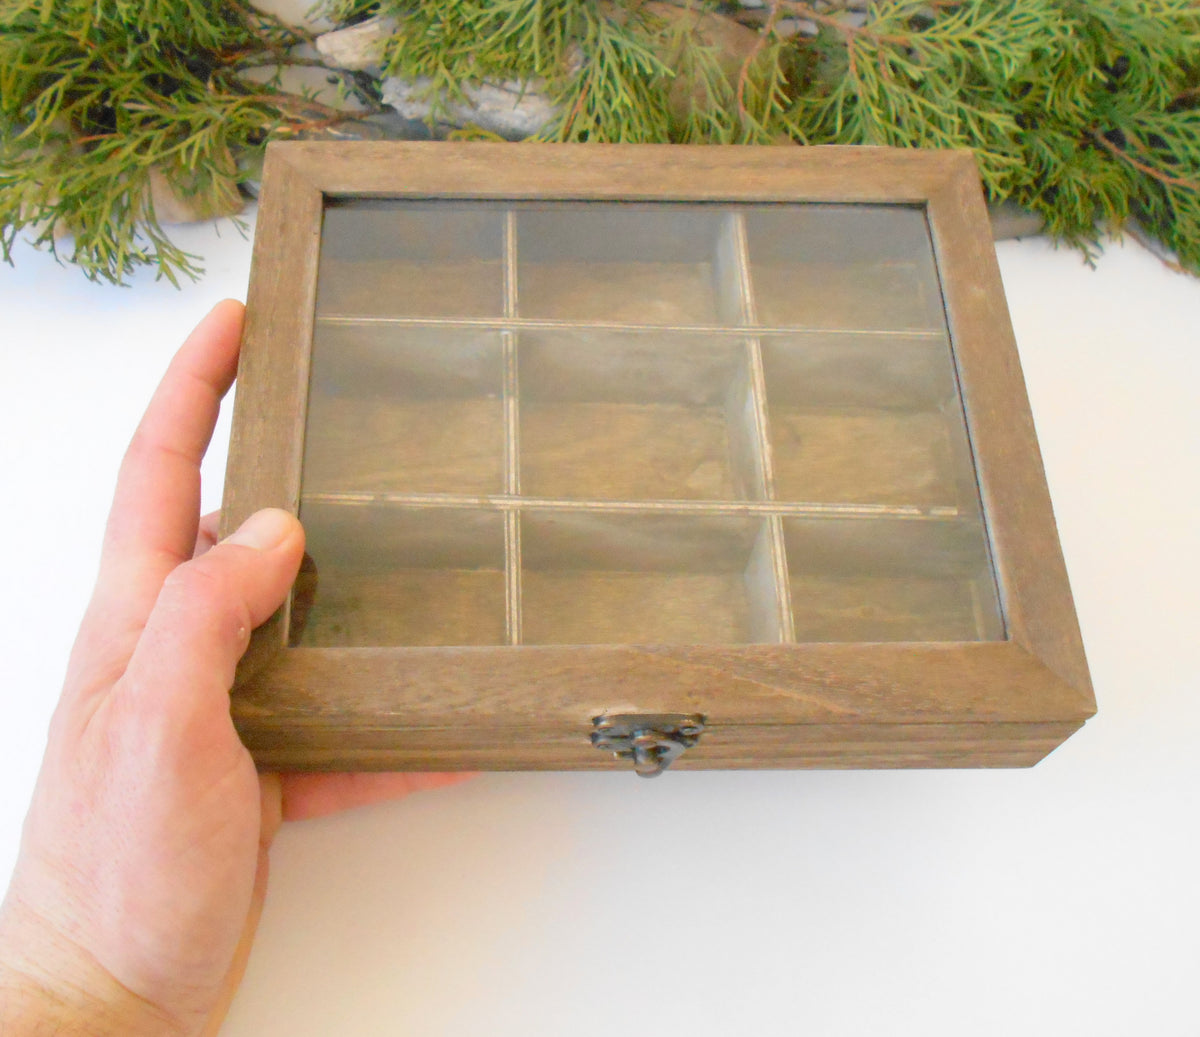 This is a wooden box with a glass display that is made of bamboo wood and that has metal hinges and closes with a bronze-color closing that may display various things like jewelry, miniatures, crystals, or other small objects of importance to you or your friends. &lt;span data-mce-fragment=&quot;1&quot;&gt;I have colored the box with mordant so that it looks like an old wood vintage box with a mahogany color.&lt;/span&gt;